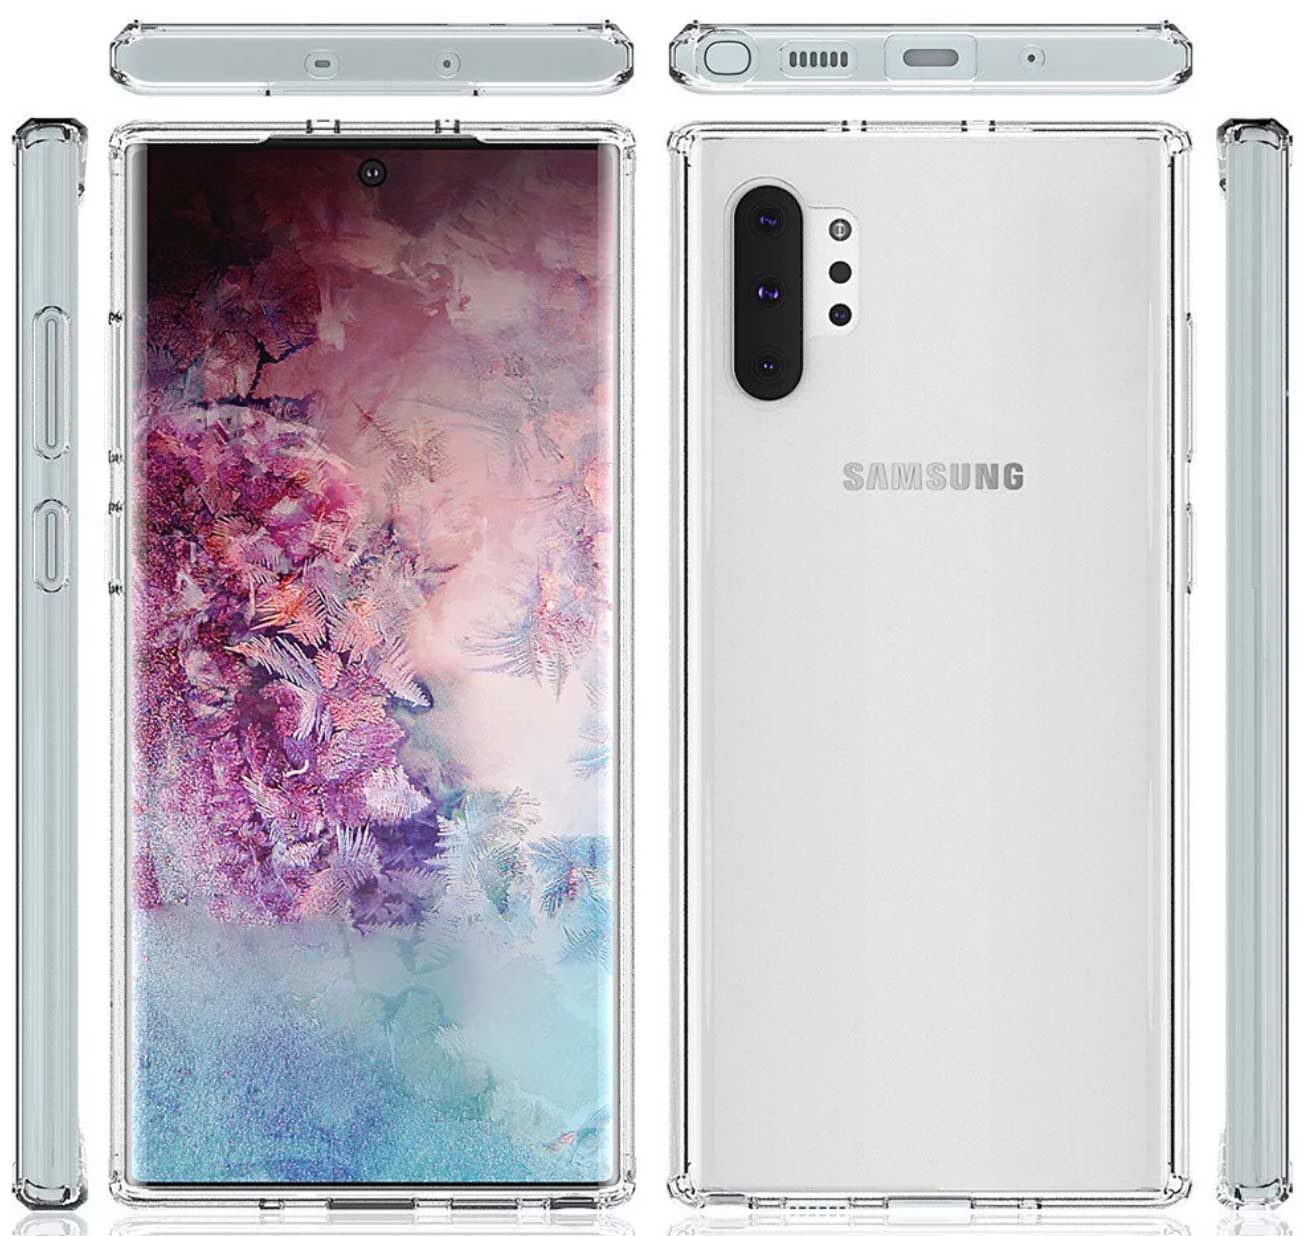 Samsung pro 10. Samsung Galaxy Note 10. Samsung Galaxy Note 10 плюс. Samsung Galaxy s10 Note. Samsung Galaxy Note 10/10+.